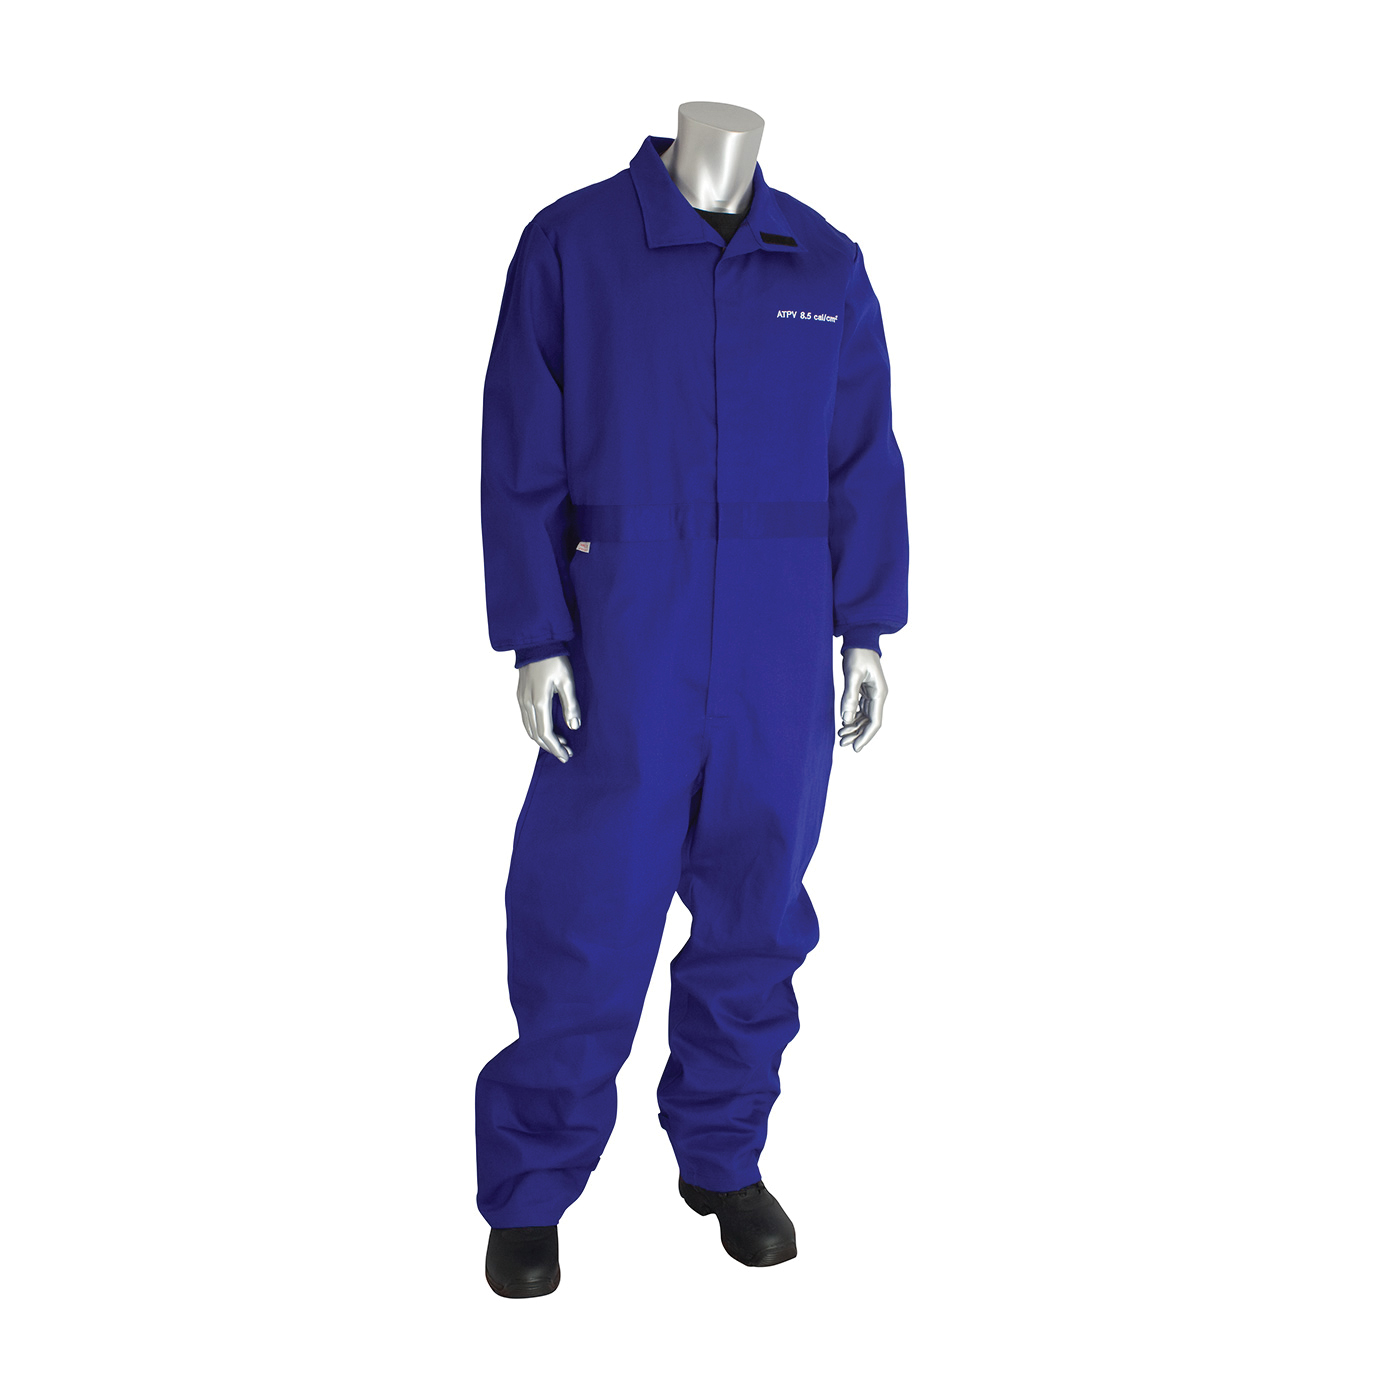 PIP® 9100-2120D/3X Flame Resistant Coverall With Vented Back, 3XL, Royal Blue, 90% Cotton/10% Nylon/FR Twill Weave, 56 to 58 in Chest, 32 in L Inseam